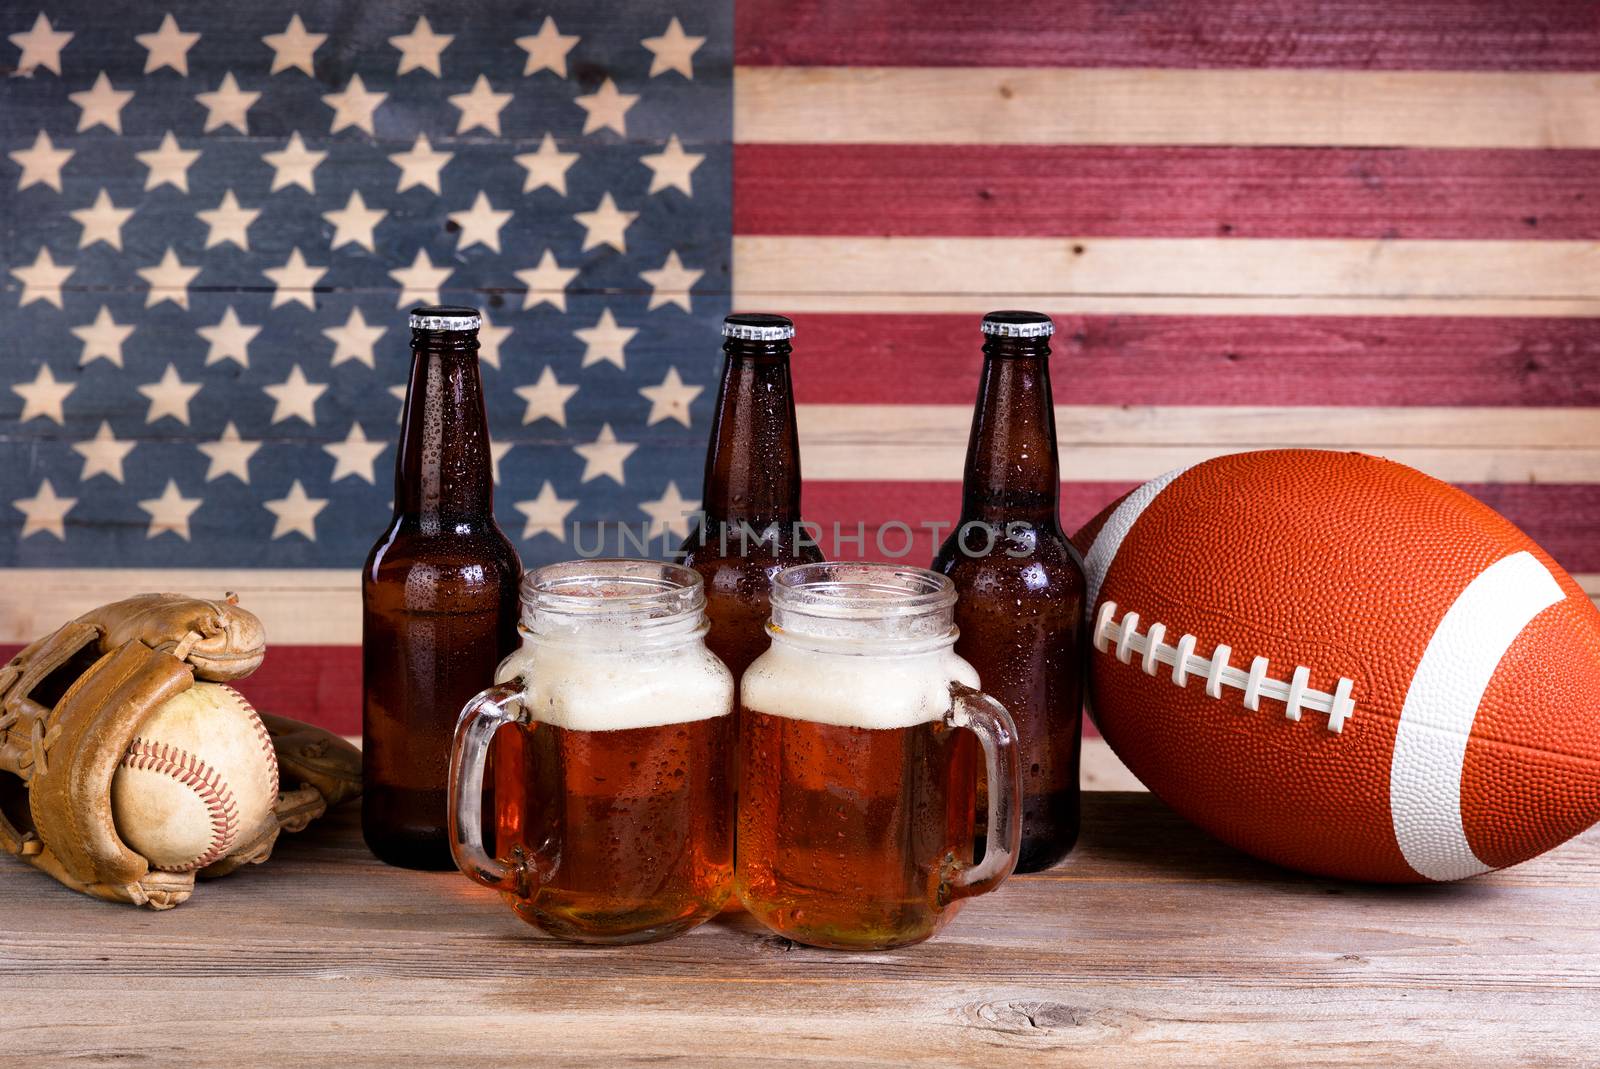 Beer and sports stuff for the holiday season by tab1962